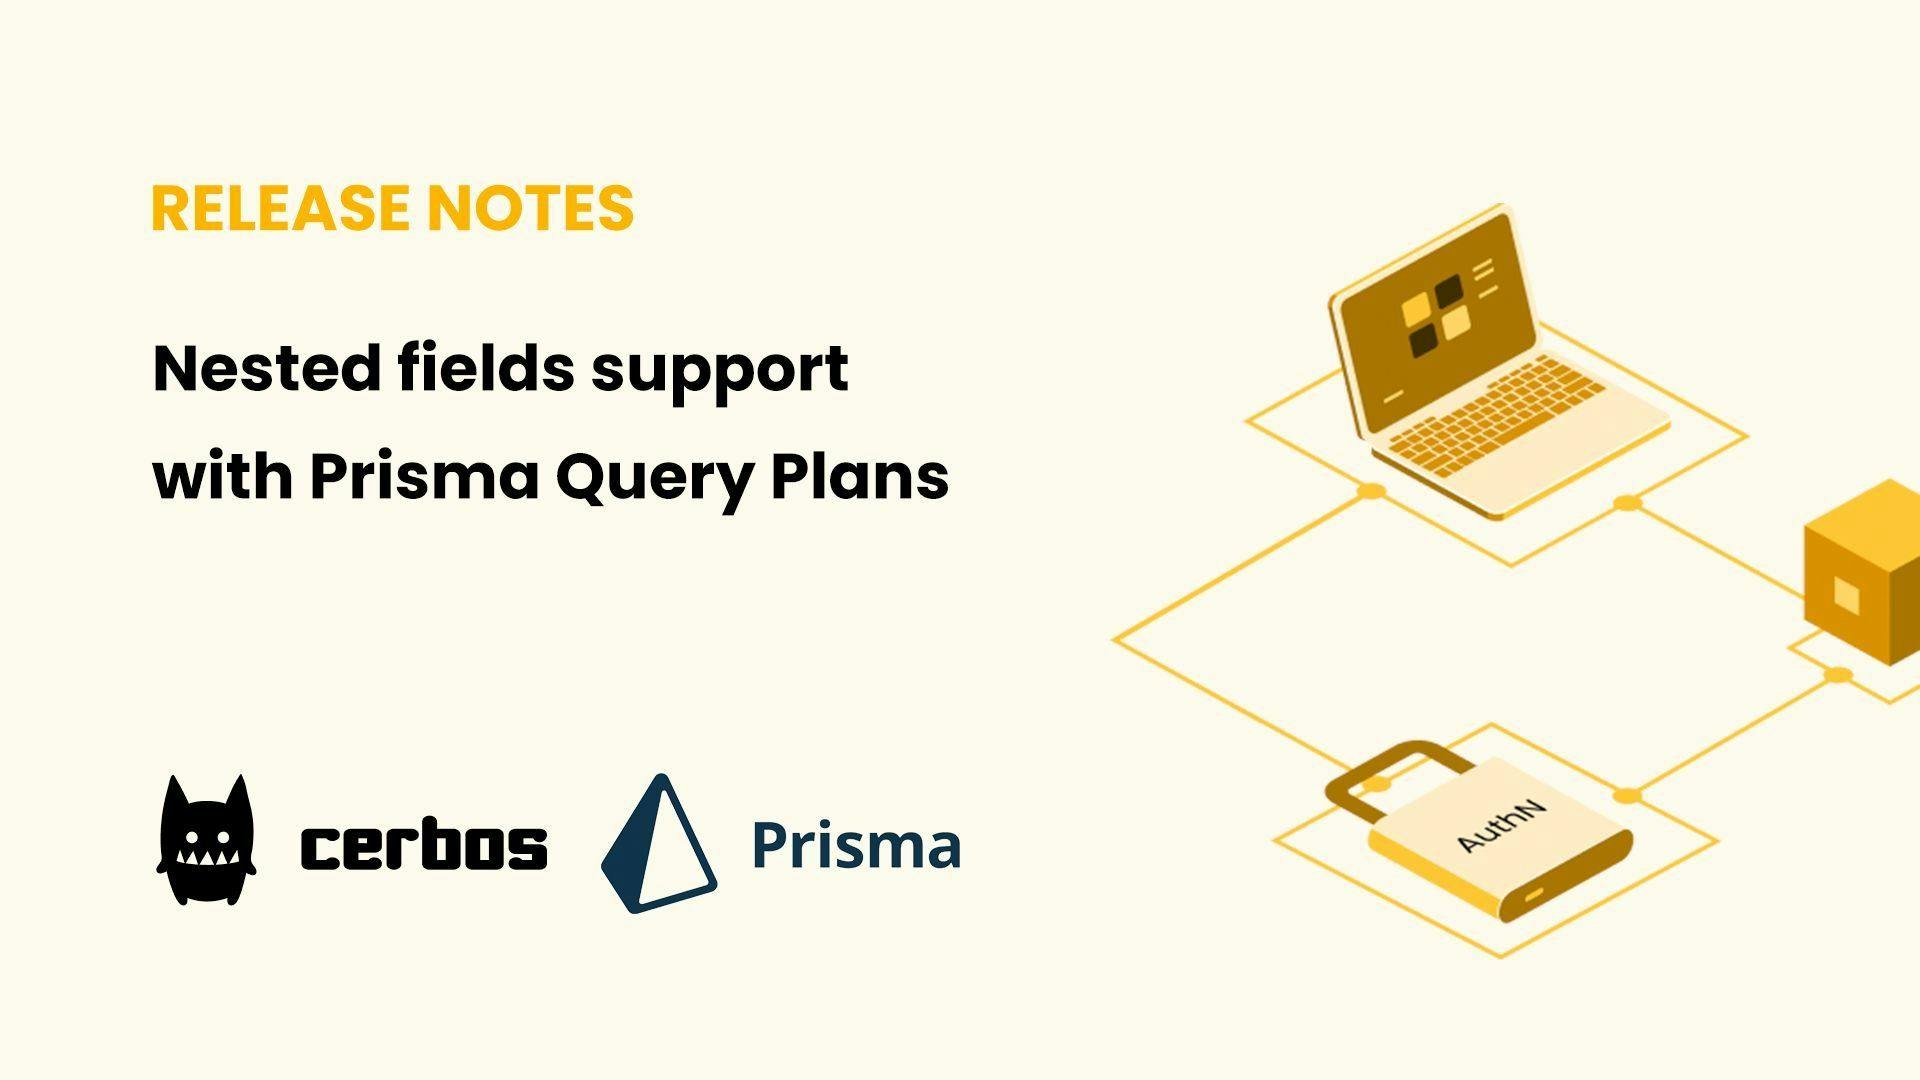 Nested fields support with Prisma Query Plans